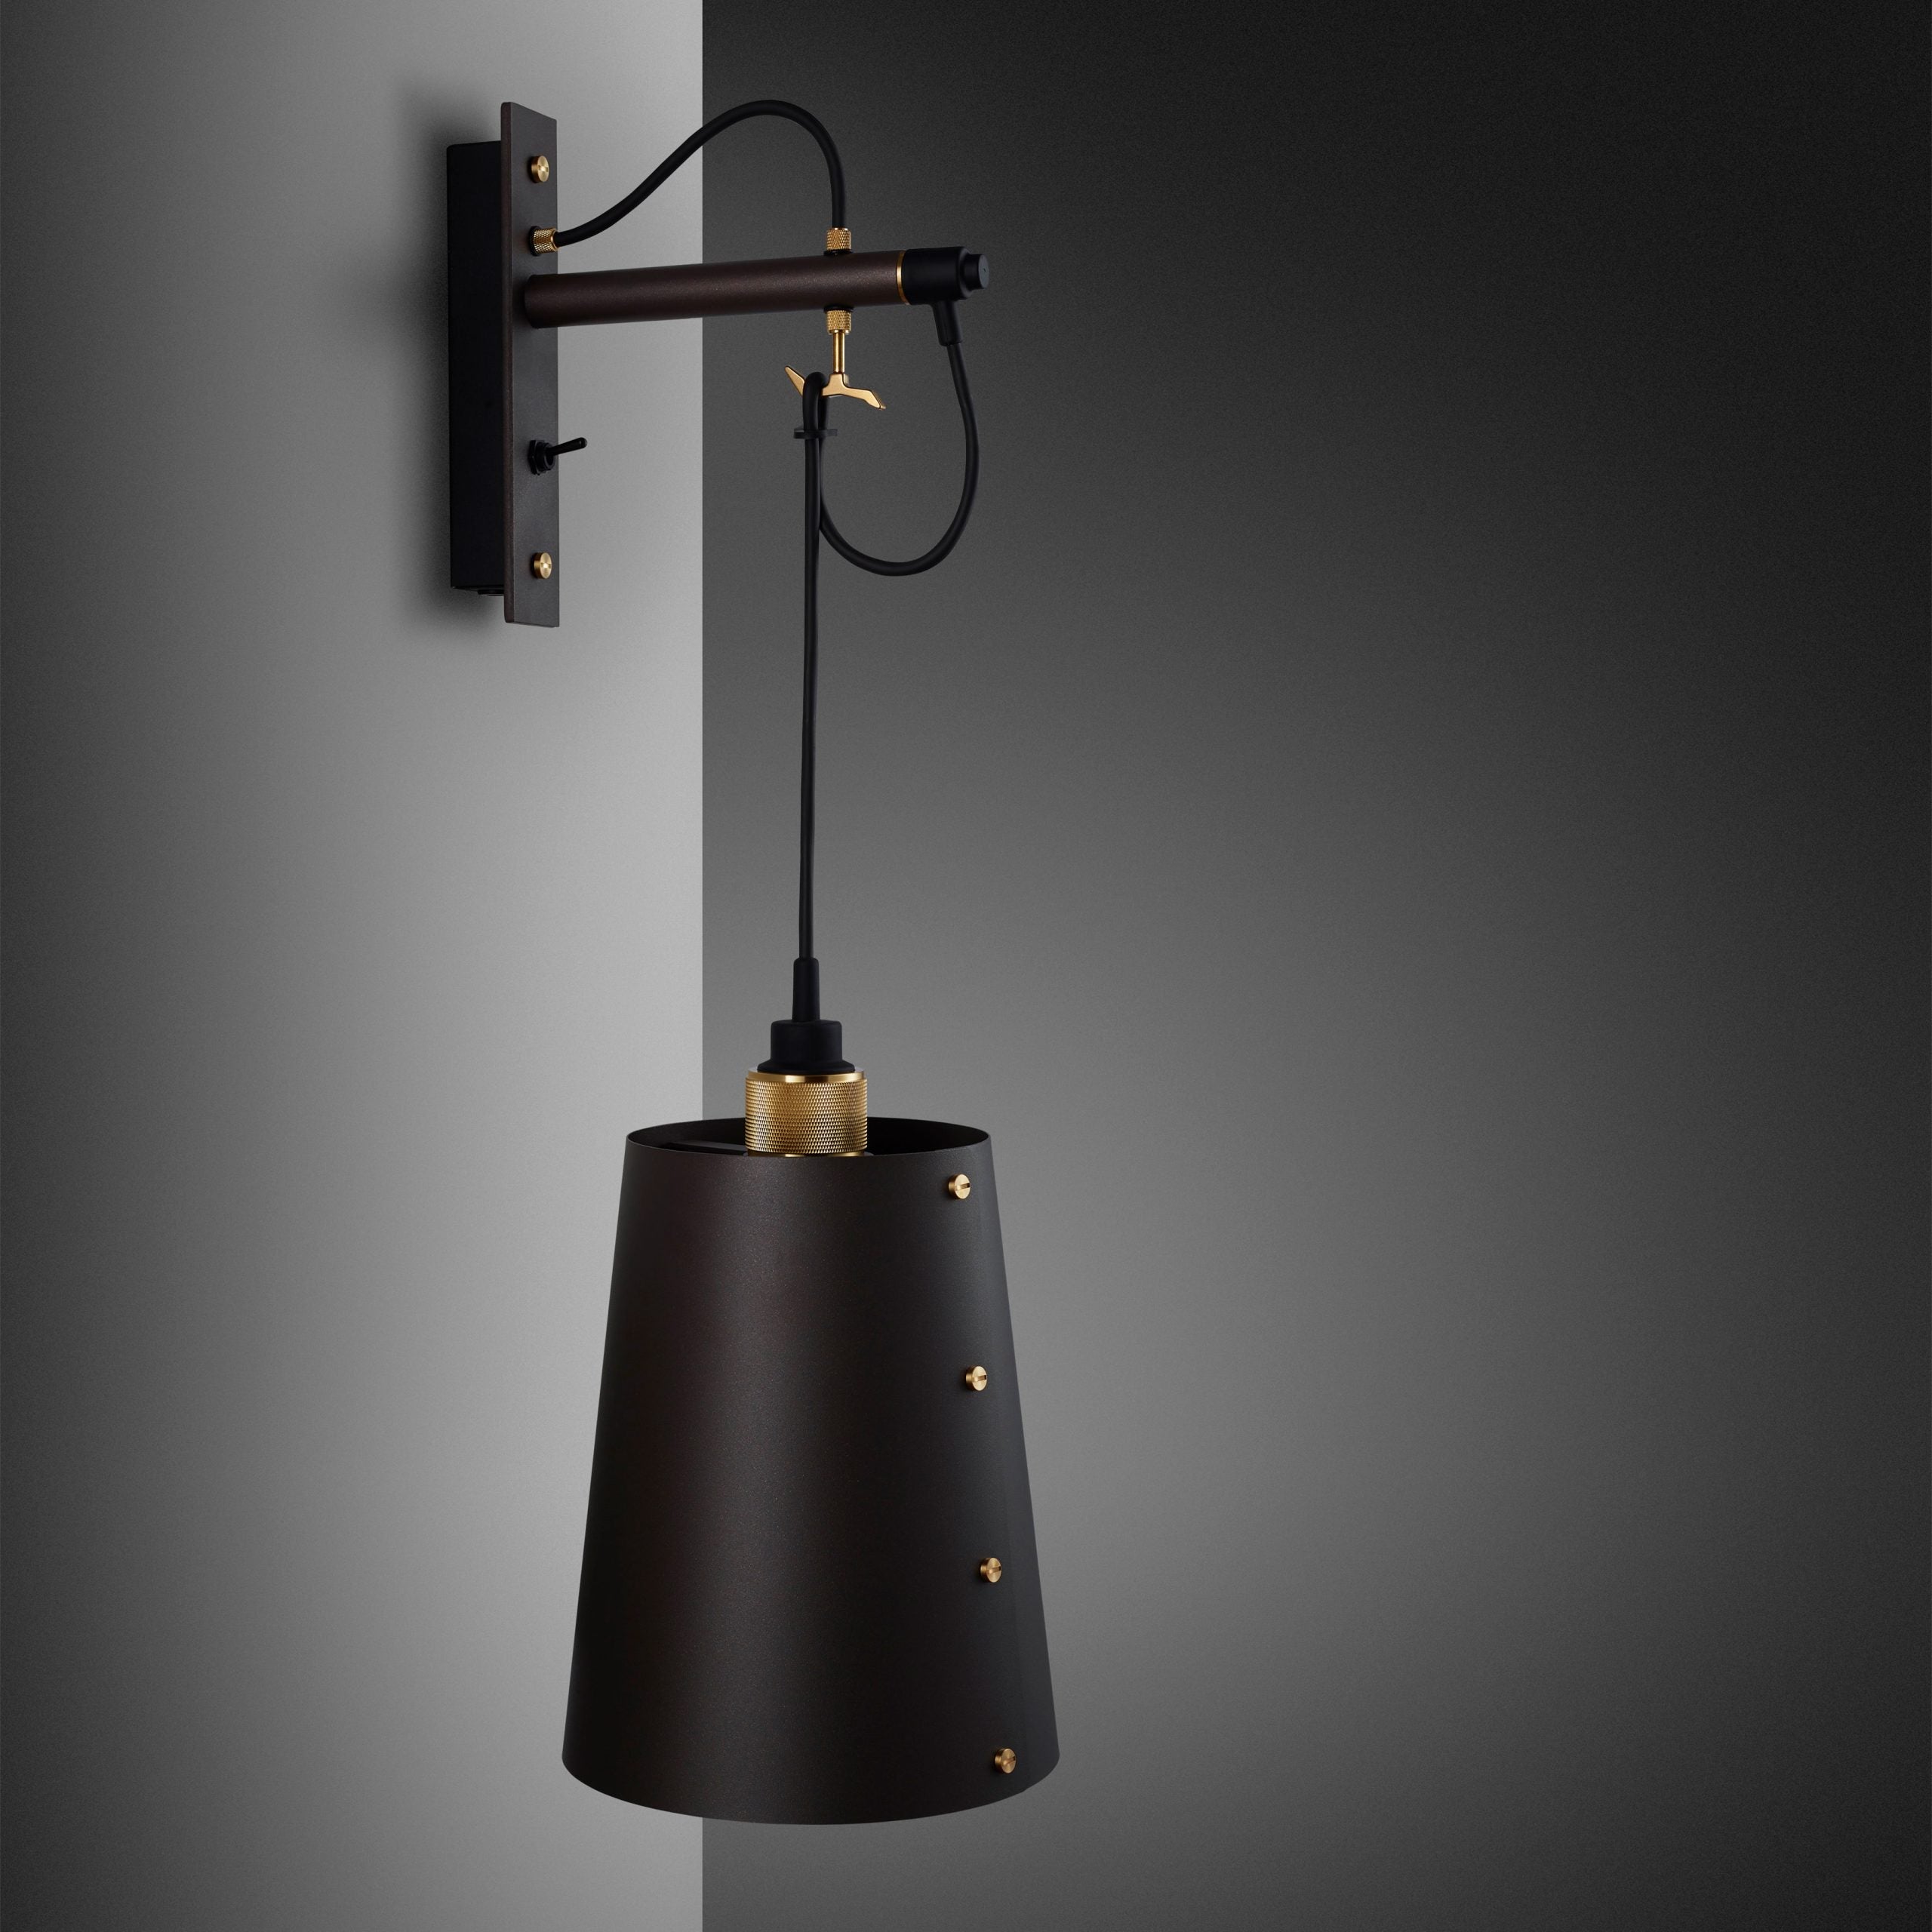 Buster + Punch Hooked Wall Sconce Wall Light Fixtures Buster + Punch Graphite/Brass & Graphite Shade Large 